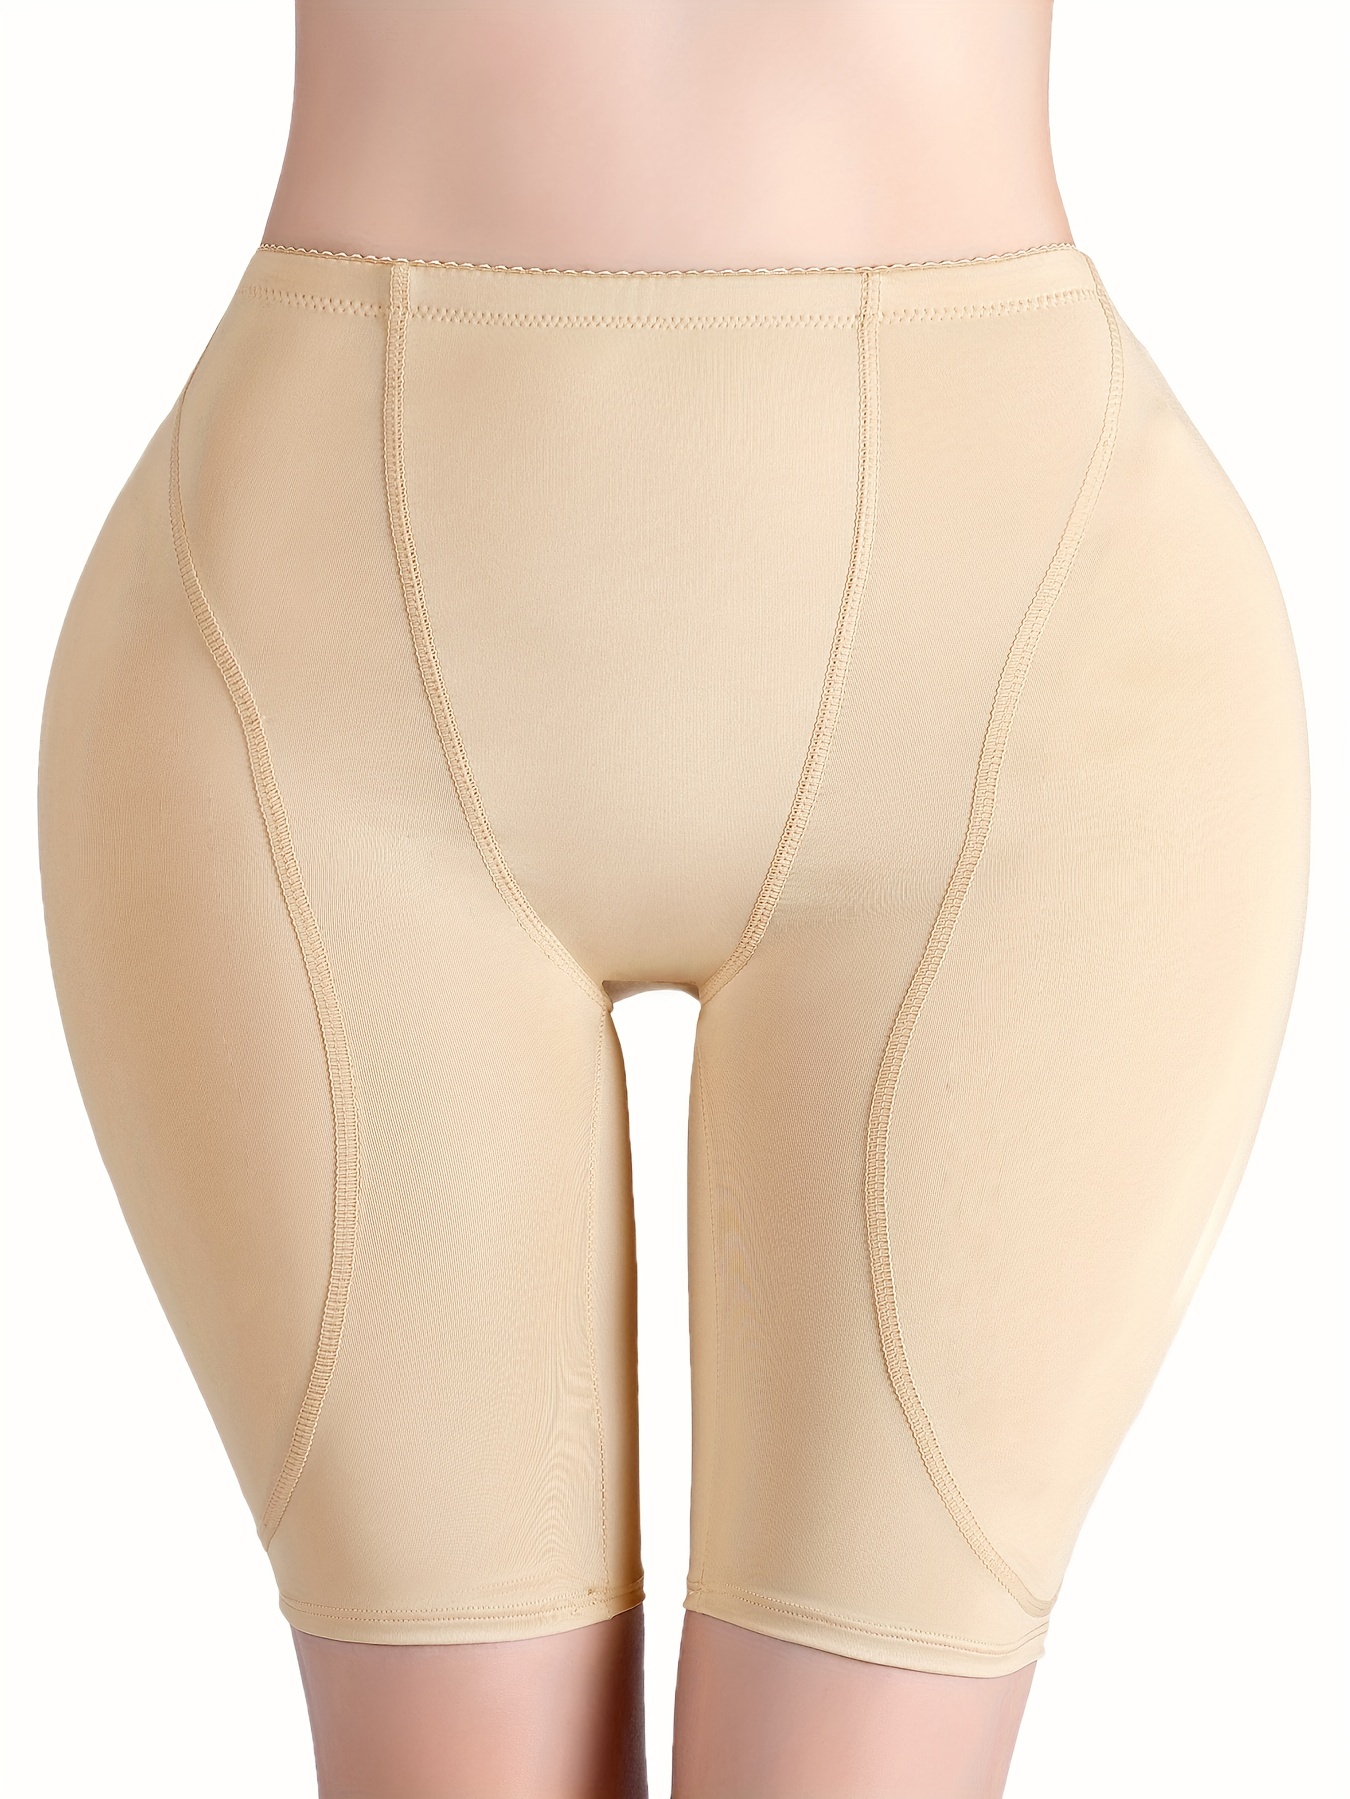  mmknlrm Padded Enhancer Hip Pads for Women Shapewear